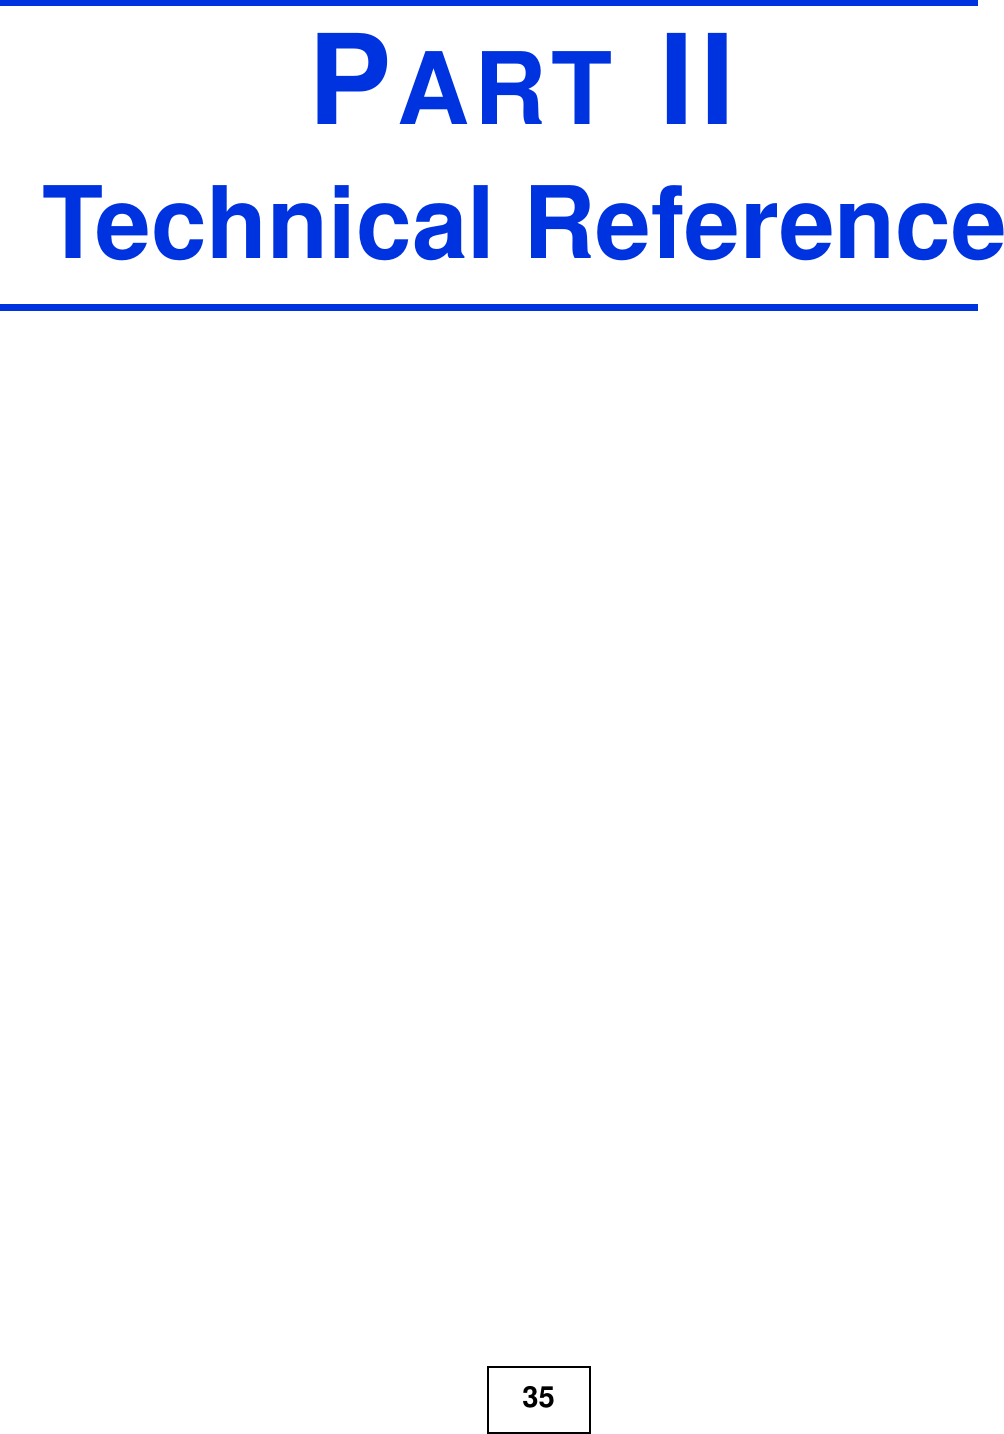 35PART IITechnical Reference